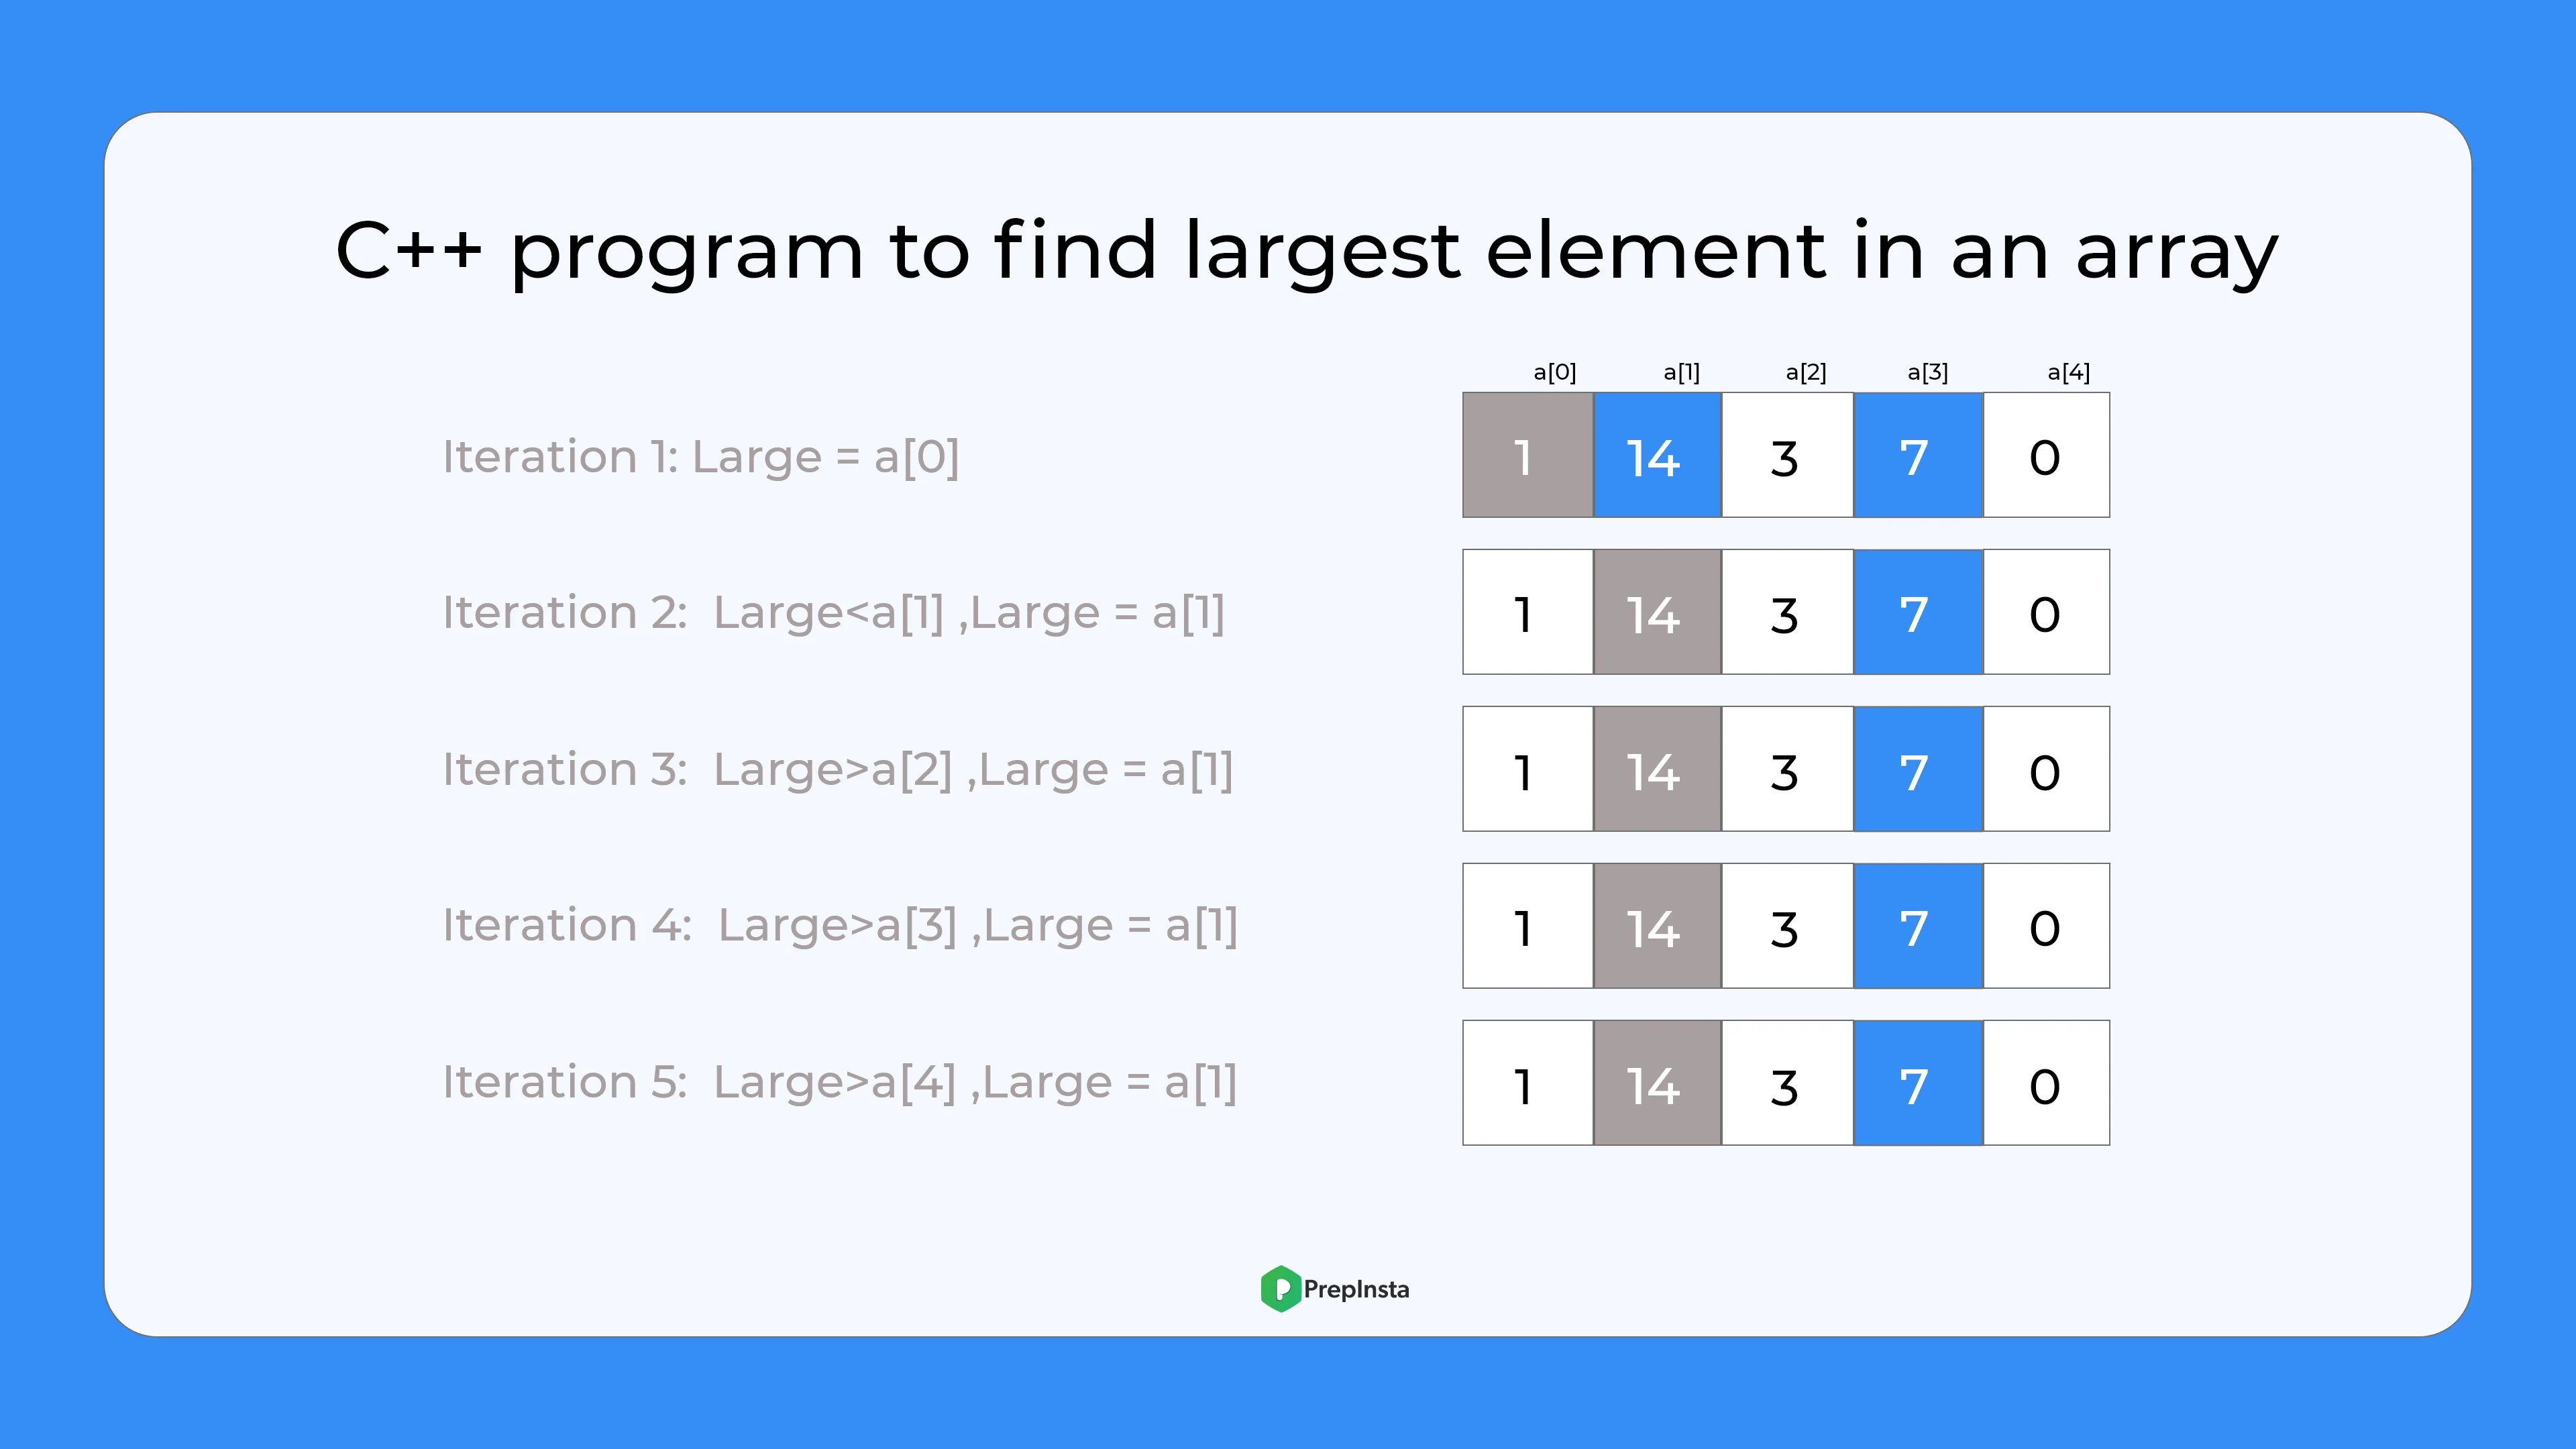 C++ program to find largest element in an array